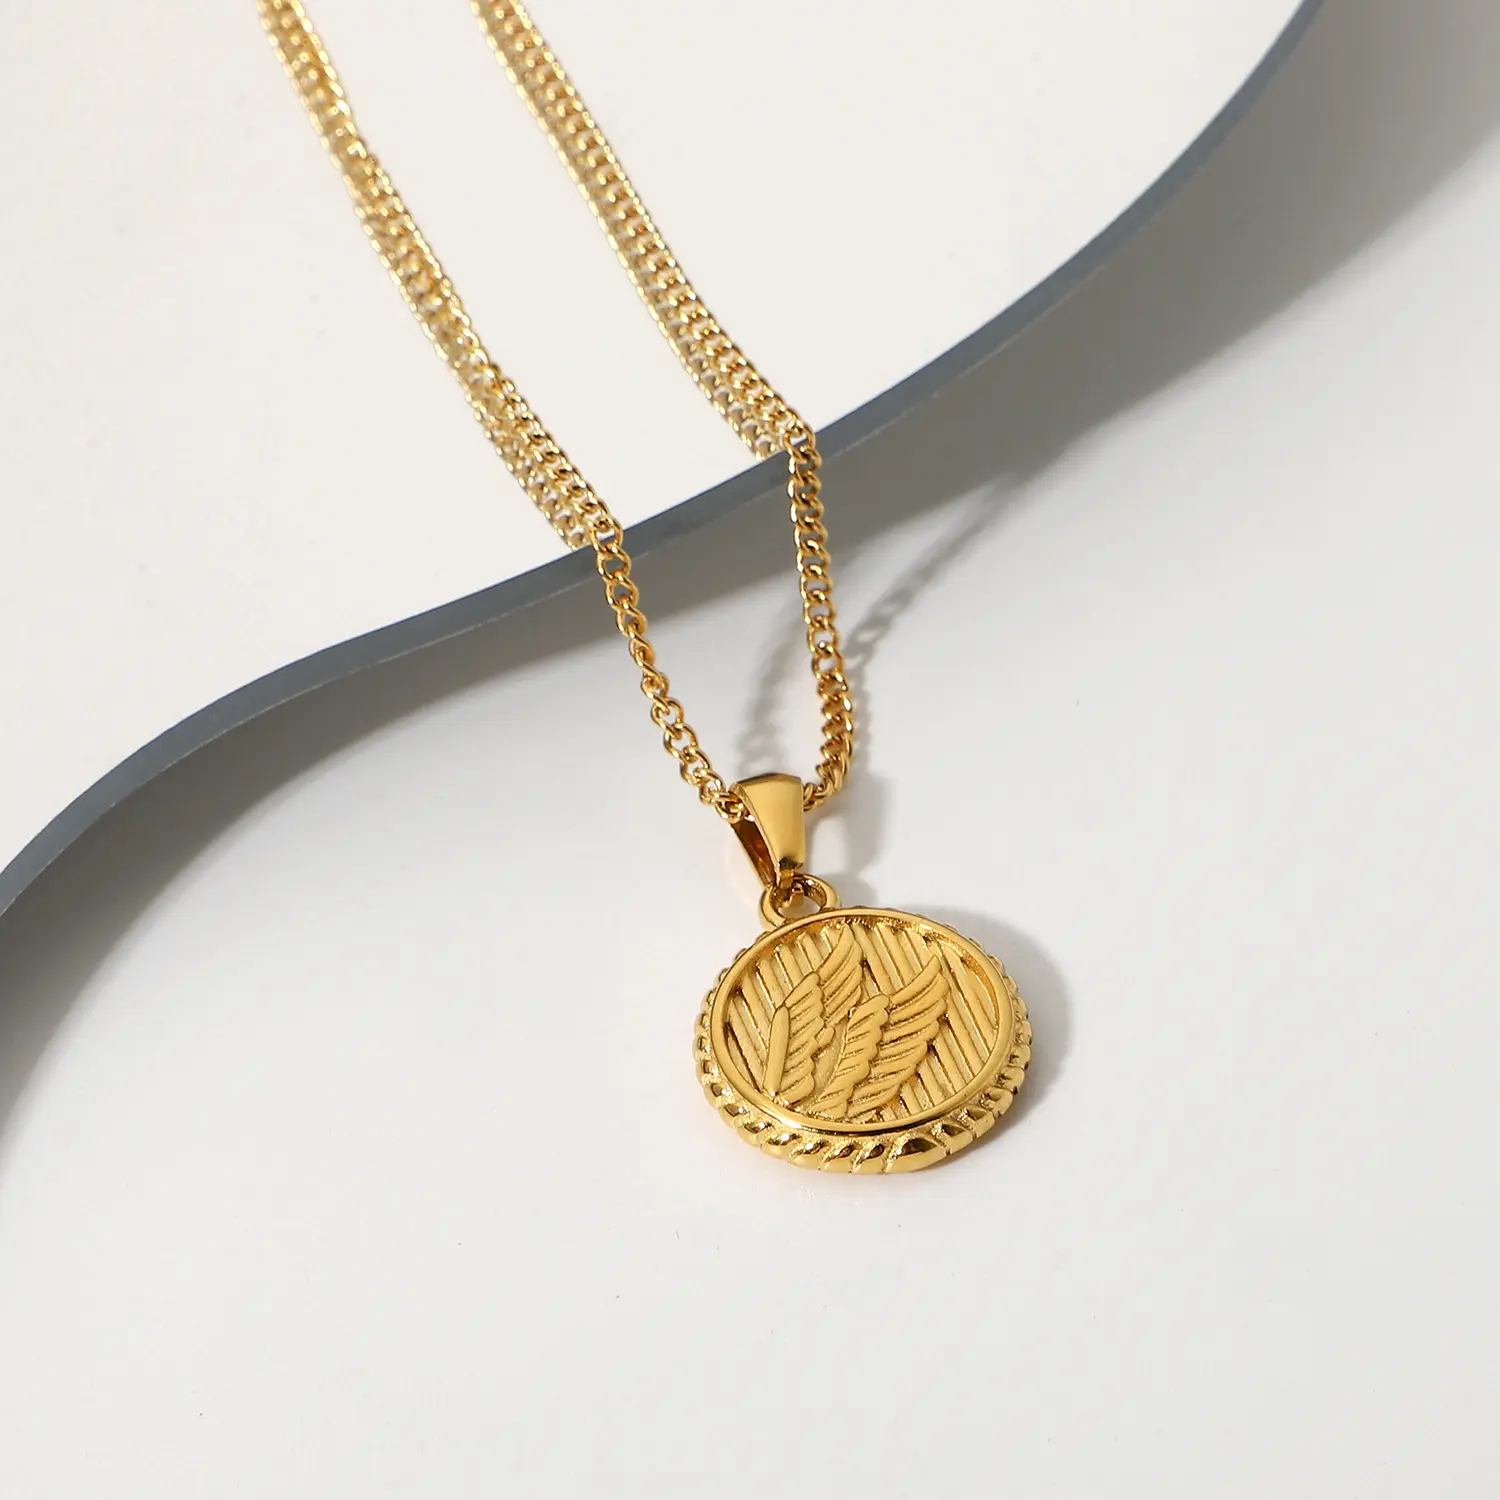 Custom Fashion Jewelry 18K Gold Plated Winged Coin Pendant Necklace Chain 316L Stainless Steel Necklaces For Women